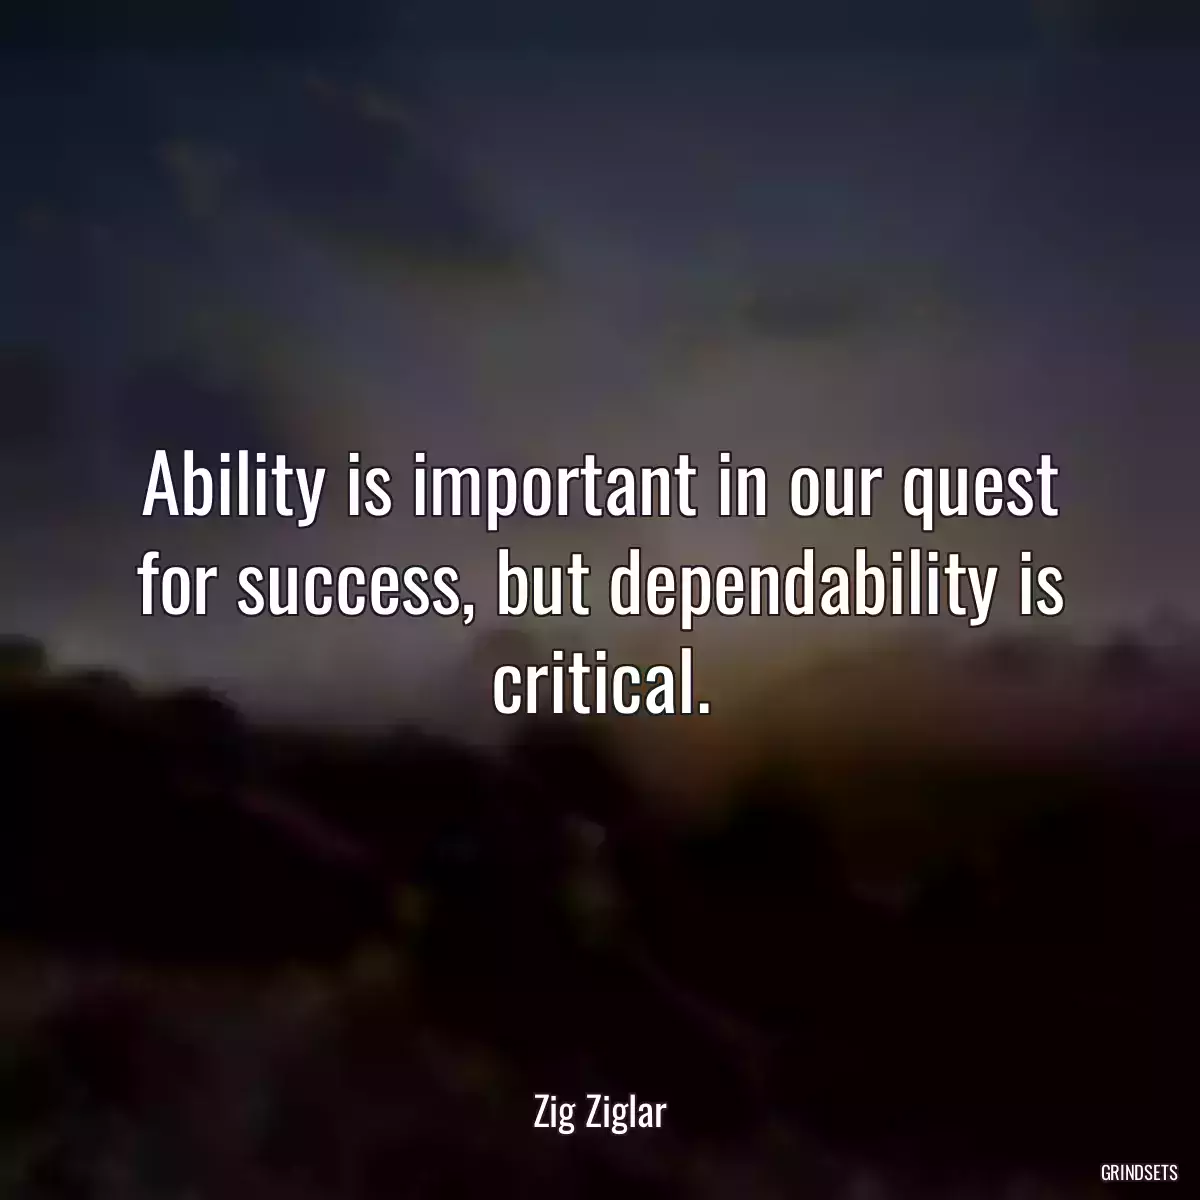 Ability is important in our quest for success, but dependability is critical.